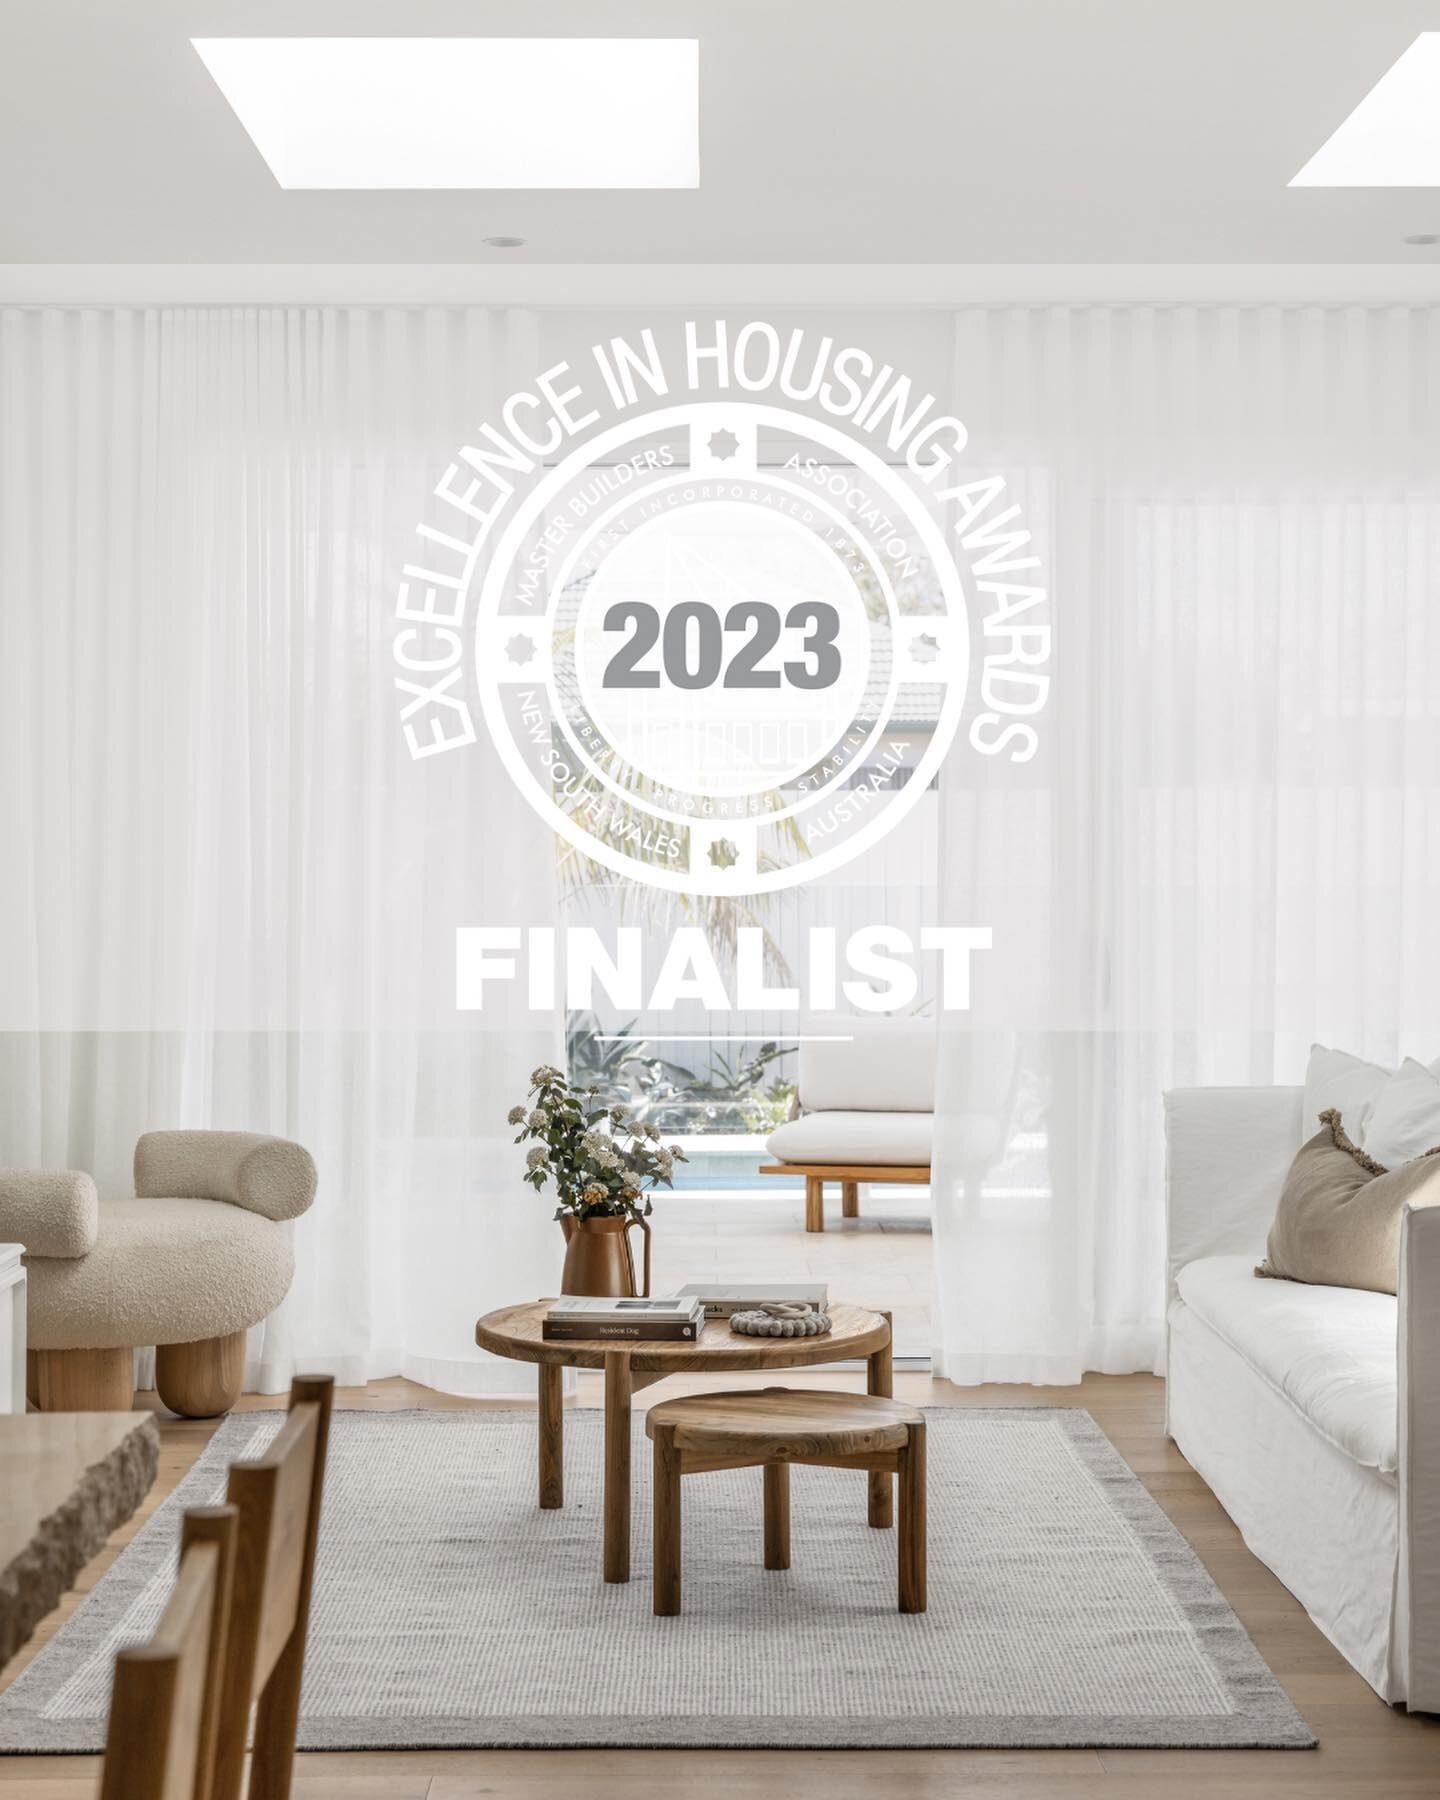 We are super excited to announce our Woonona Duplex project has been selected as a finalist in the 2023 NSW Master Builders Excellence in Housing Awards. 

This custom-designed duplex, a privilege to work on with our wonderful clients, represents the